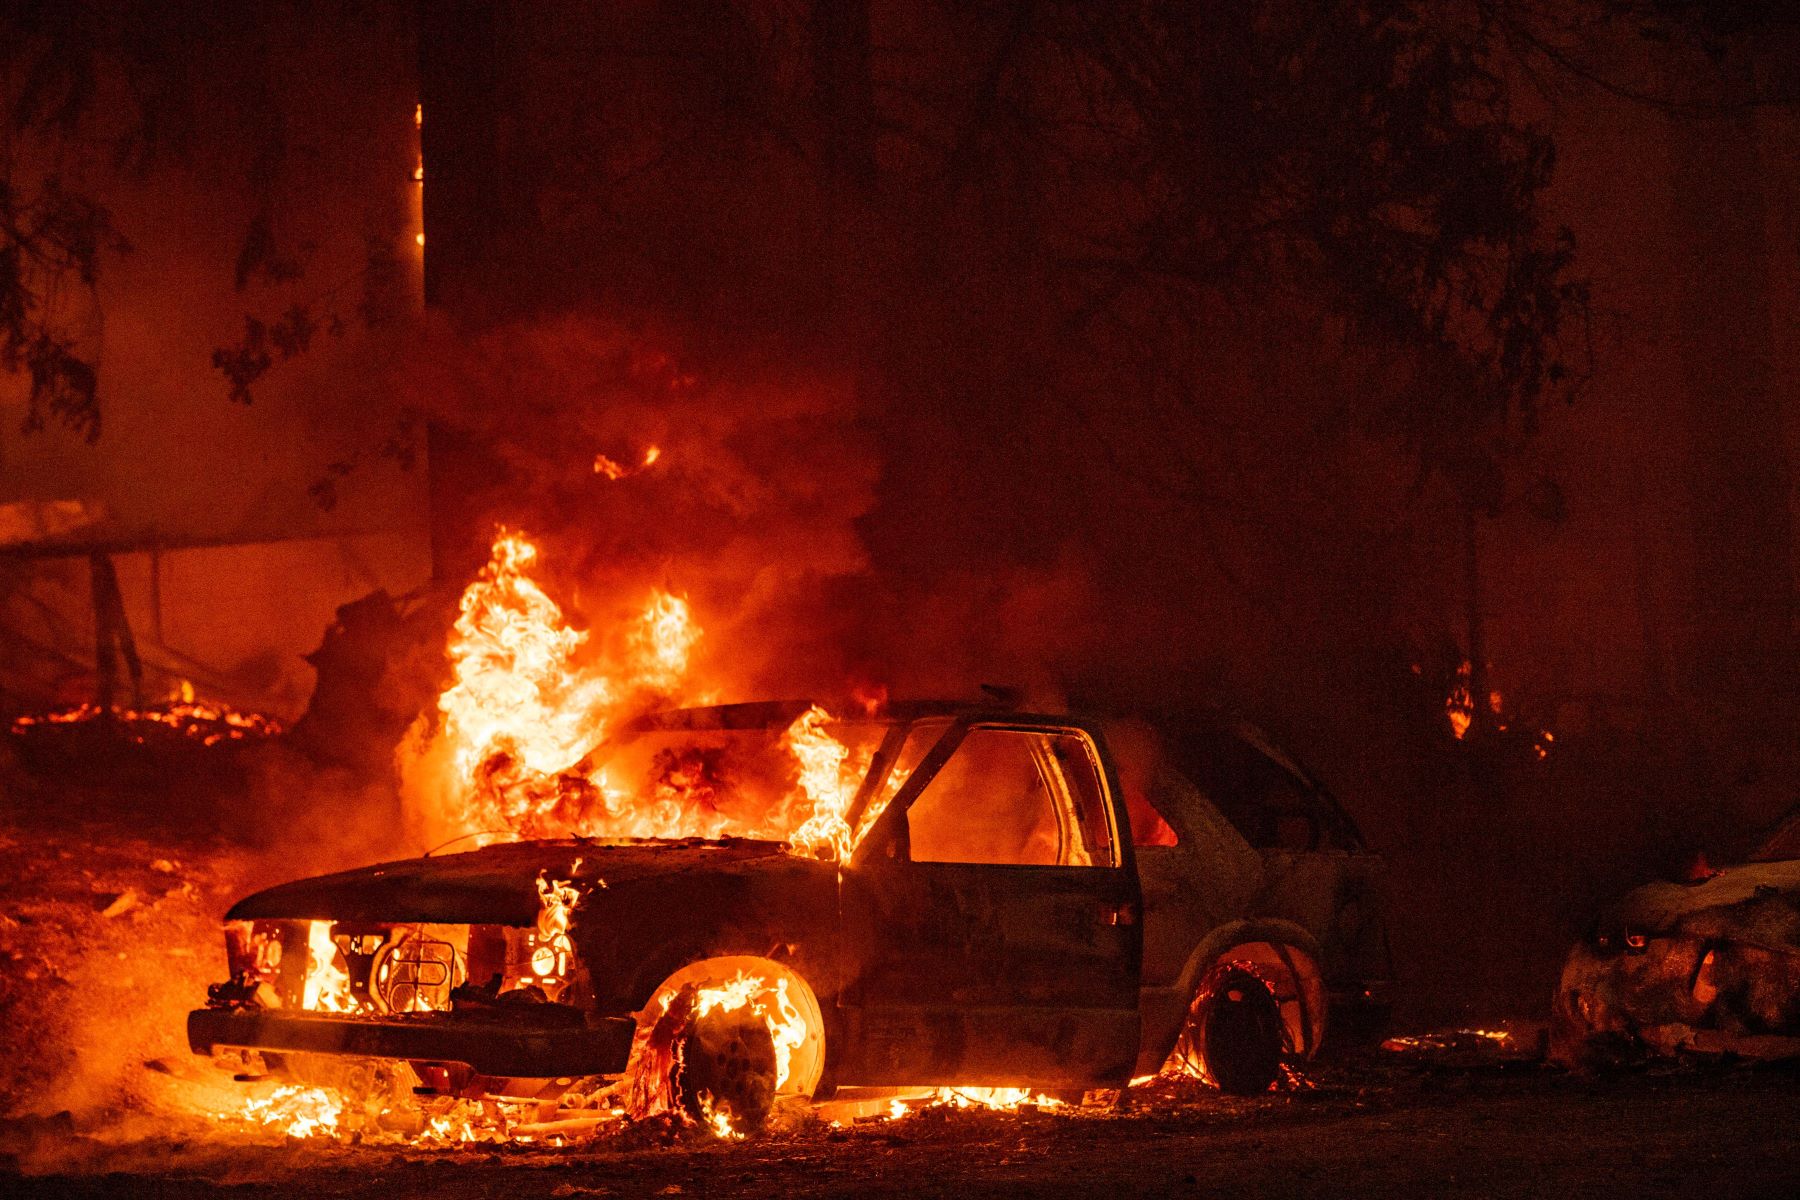 A car on fire in the Indian Falls neighborhood of Plumas County, California during the spread of the Dixie fire